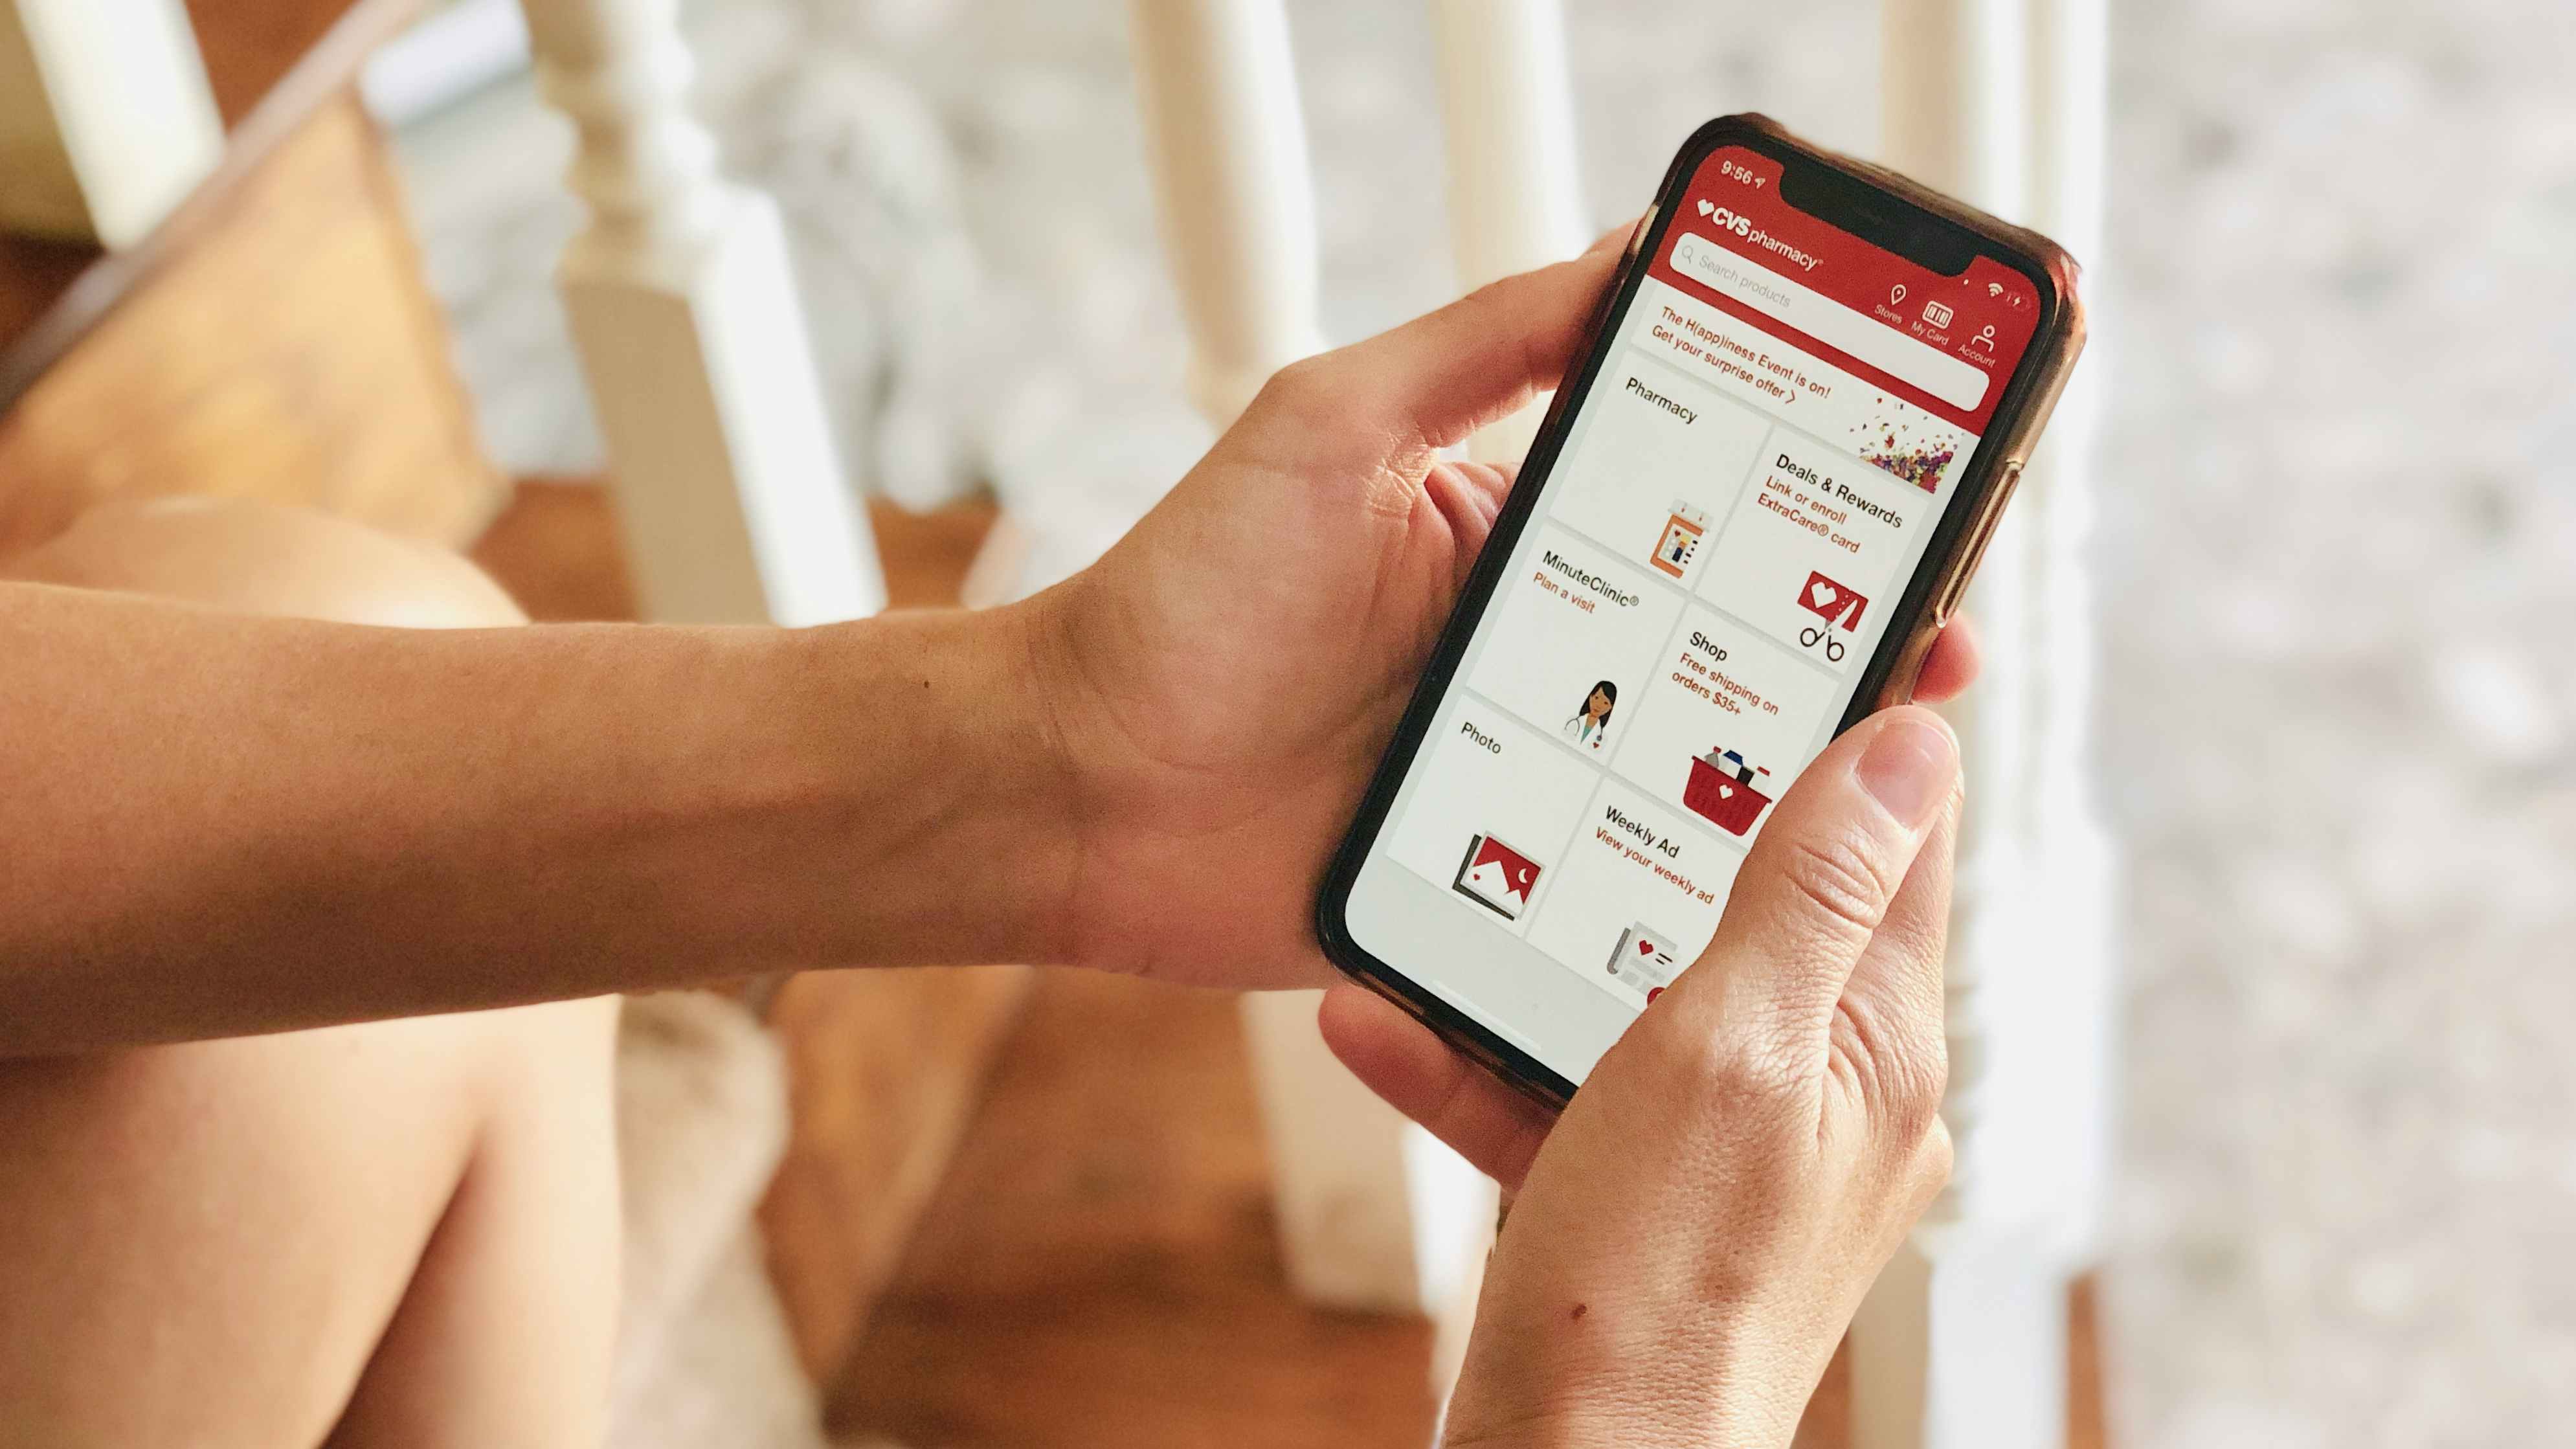 Go ahead and coupon at home with the CVS app.